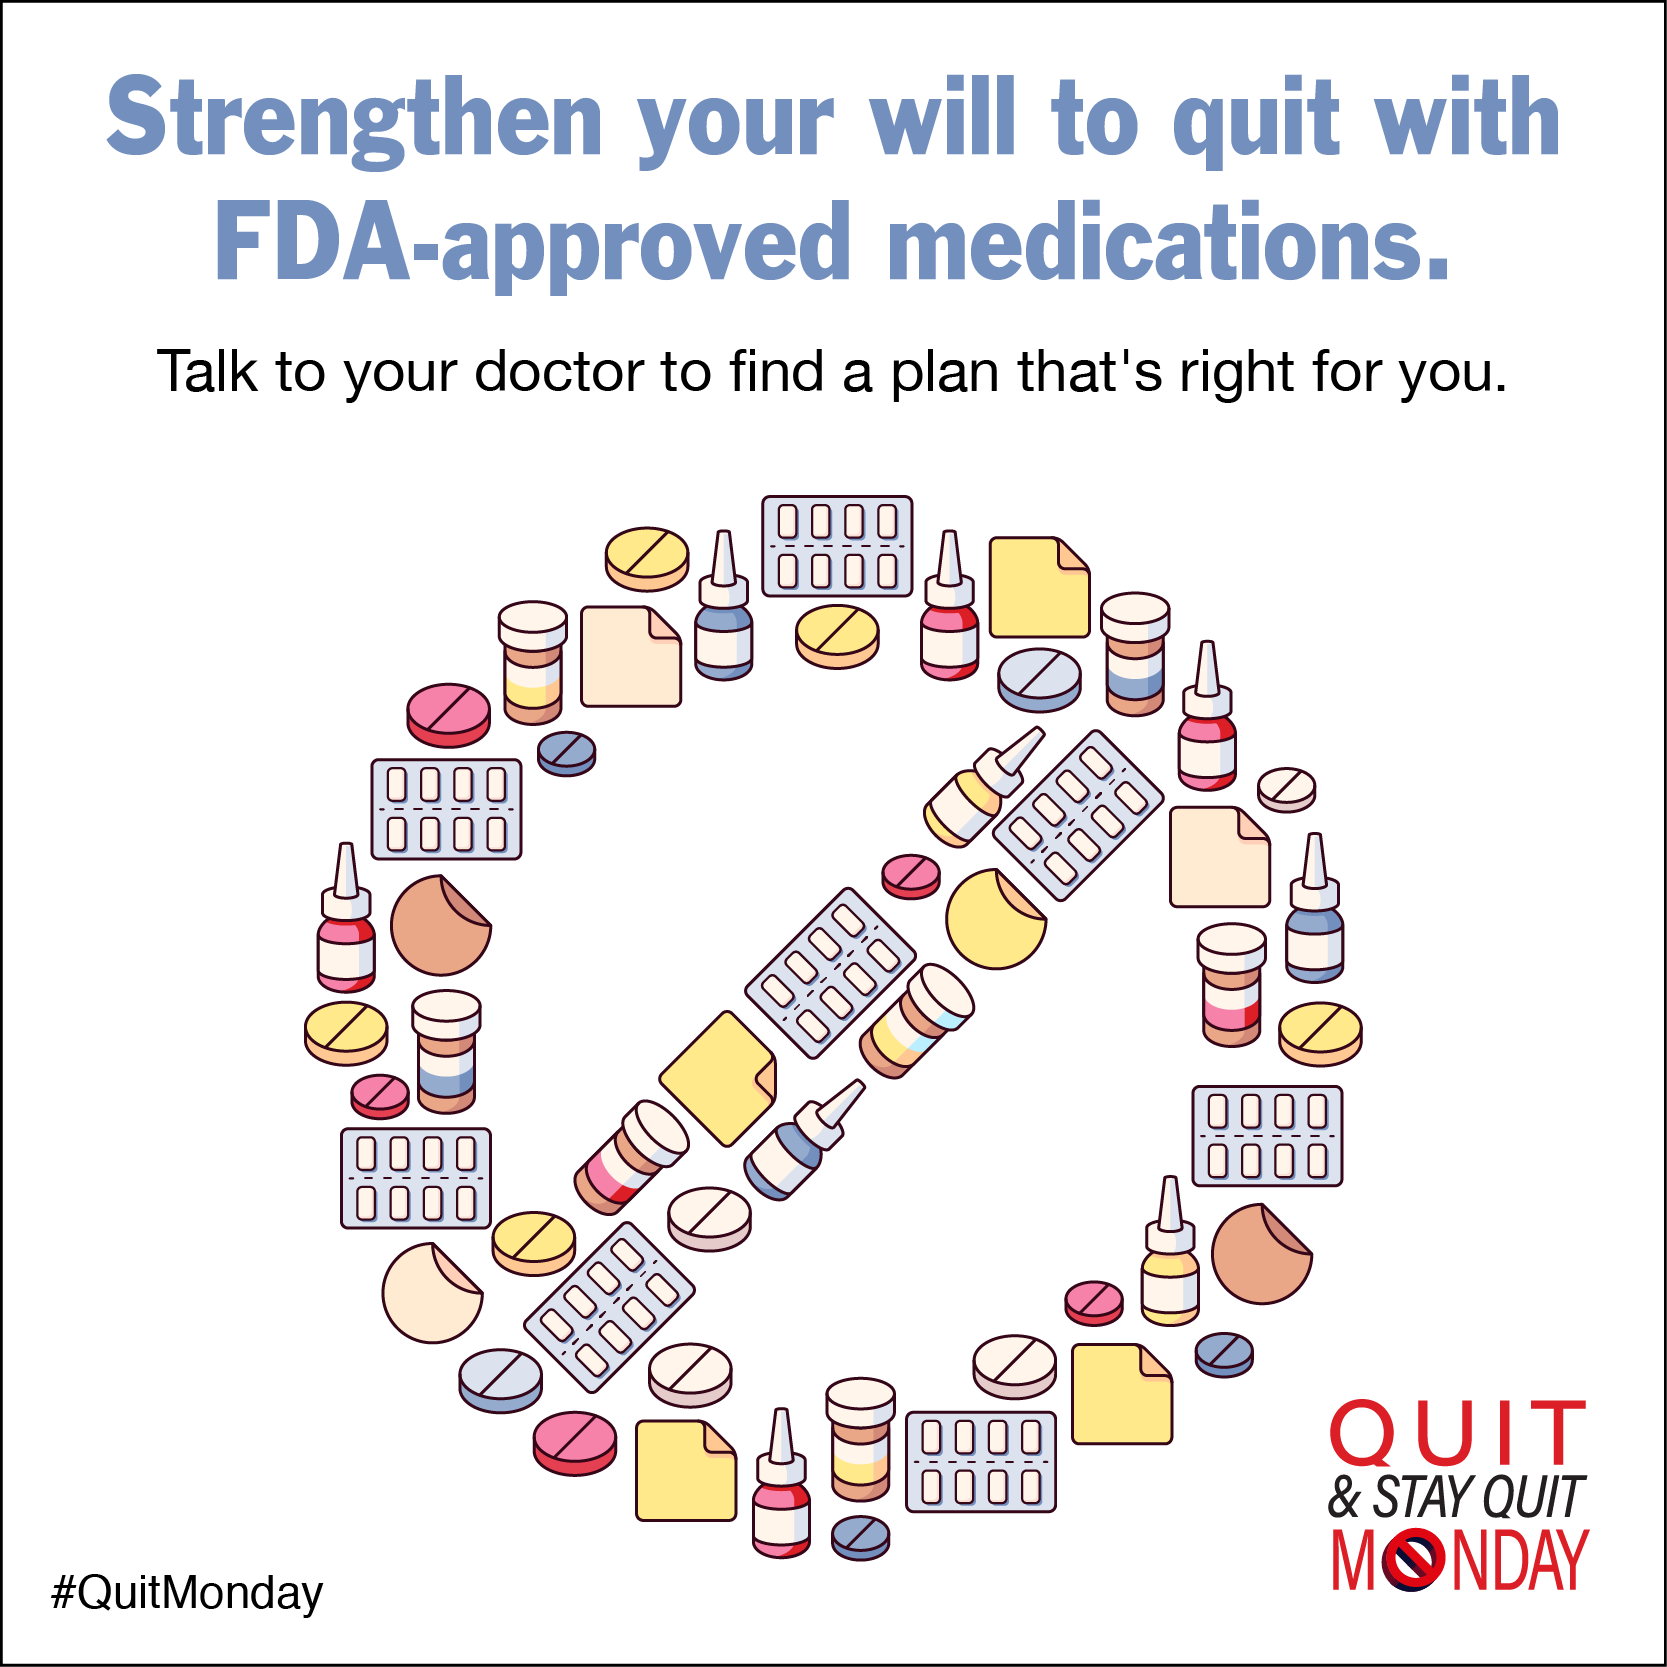 Strengthen your will to quit with FDA-approved medications. Talk to your doctor to find a plan that's right for you.